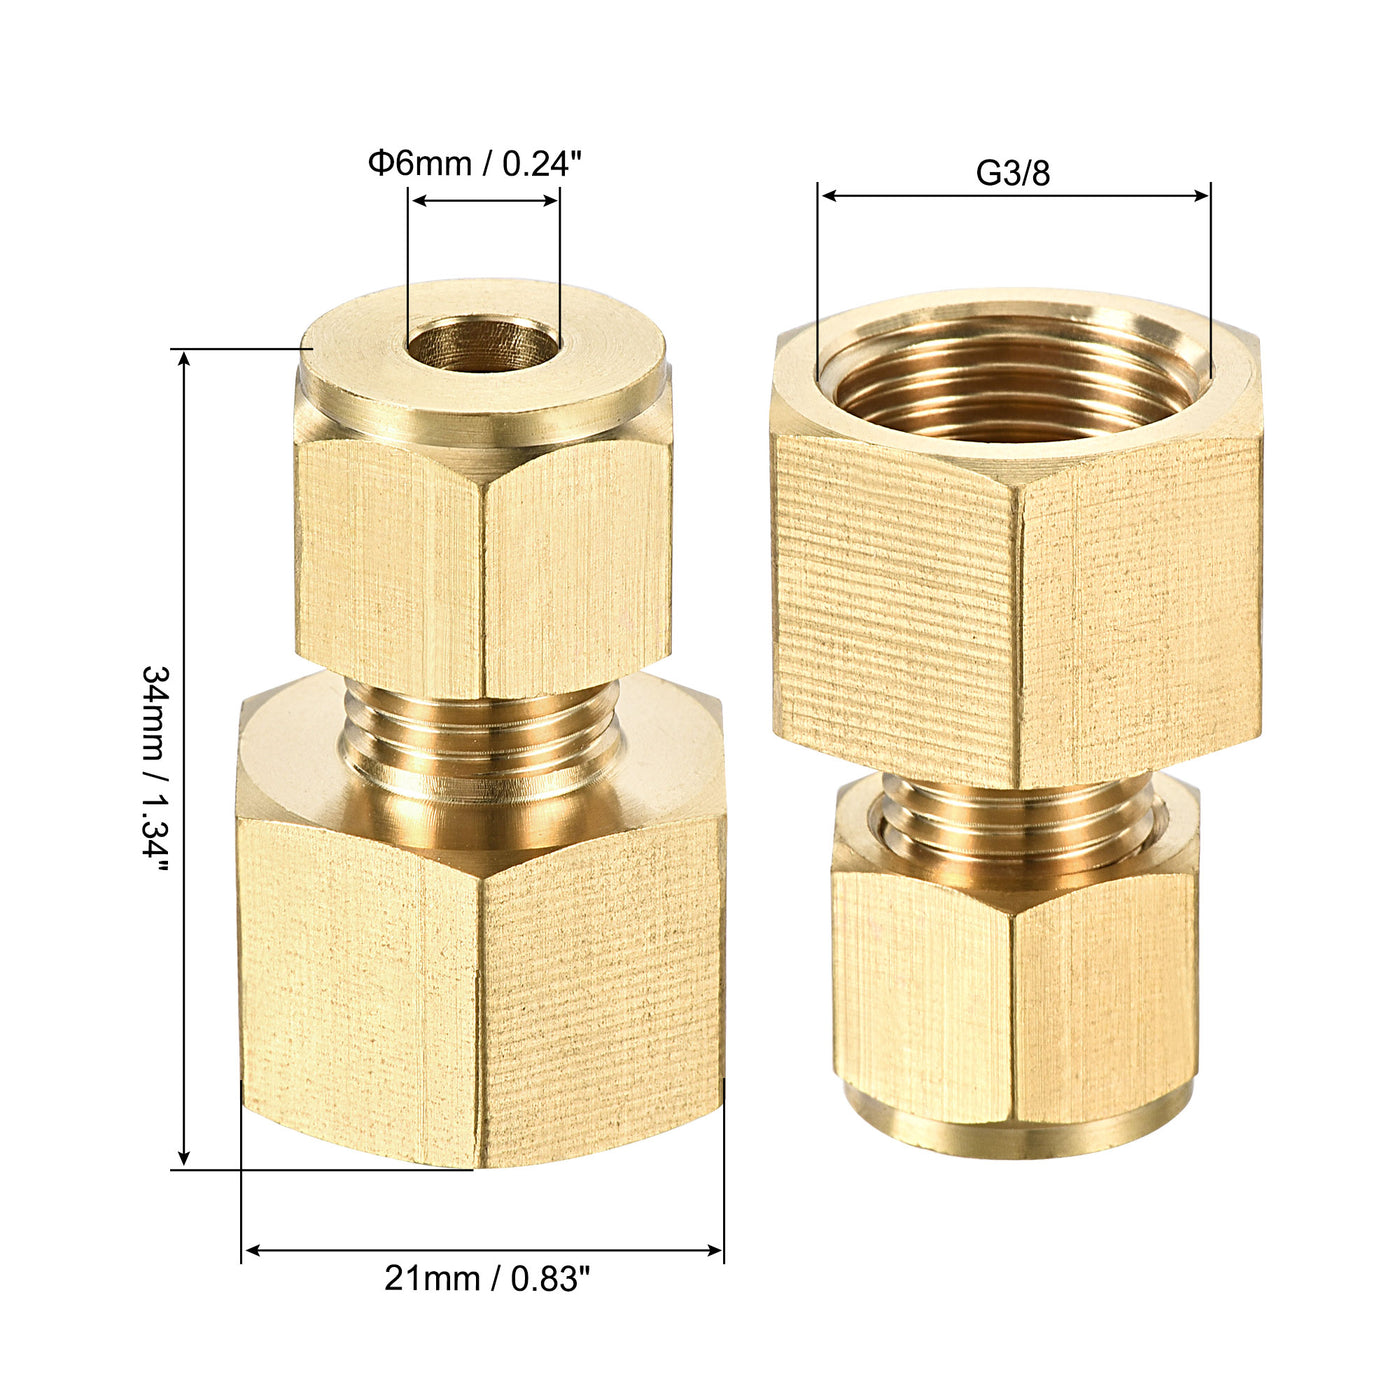 Uxcell Uxcell Compression Tube Fitting G3/8 Female Thread x 8mm Tube OD Straight Coupling Adapter Brass, 2pcs